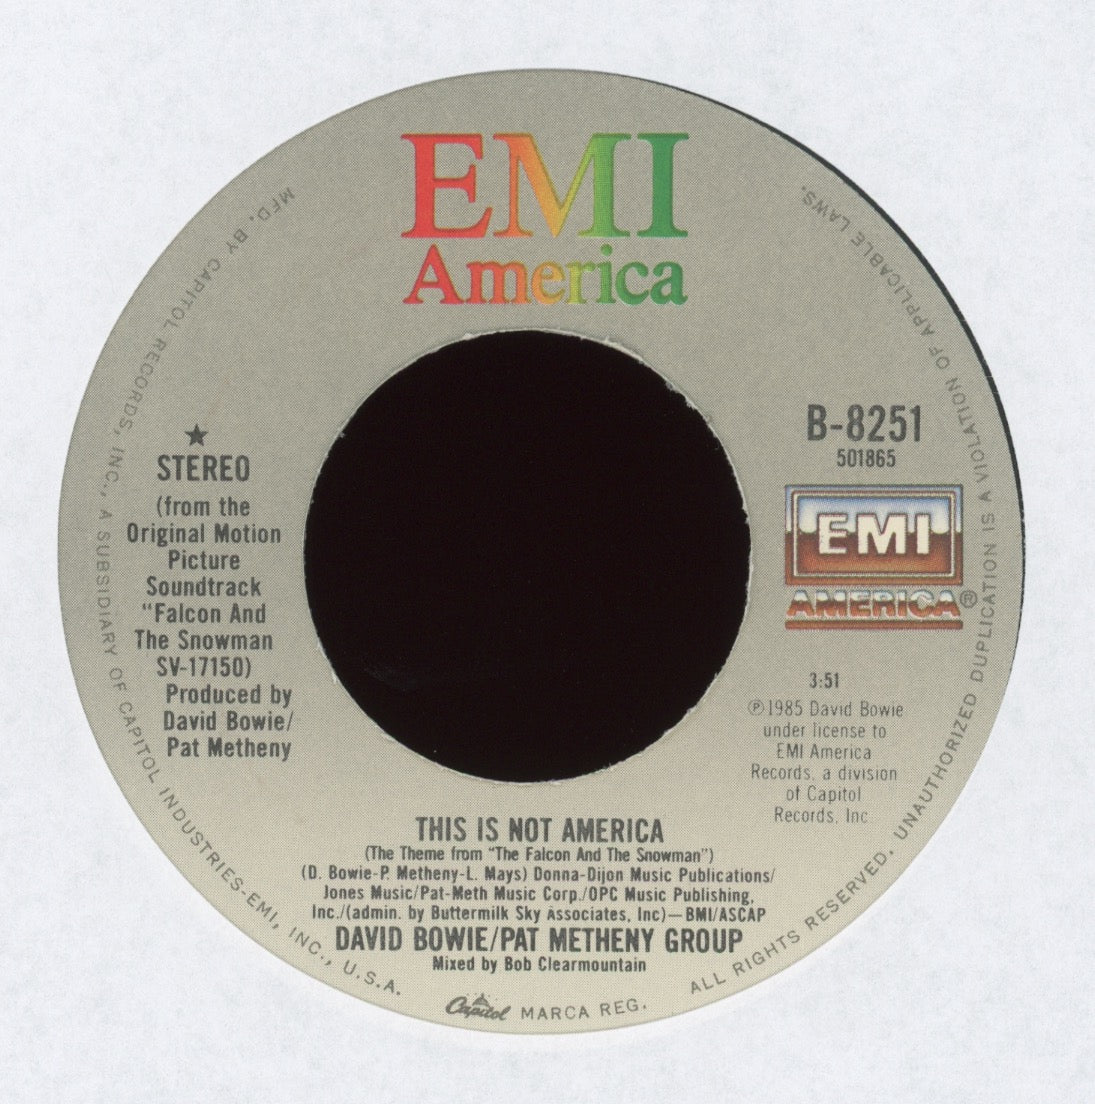 David Bowie - This Is Not America on EMI America